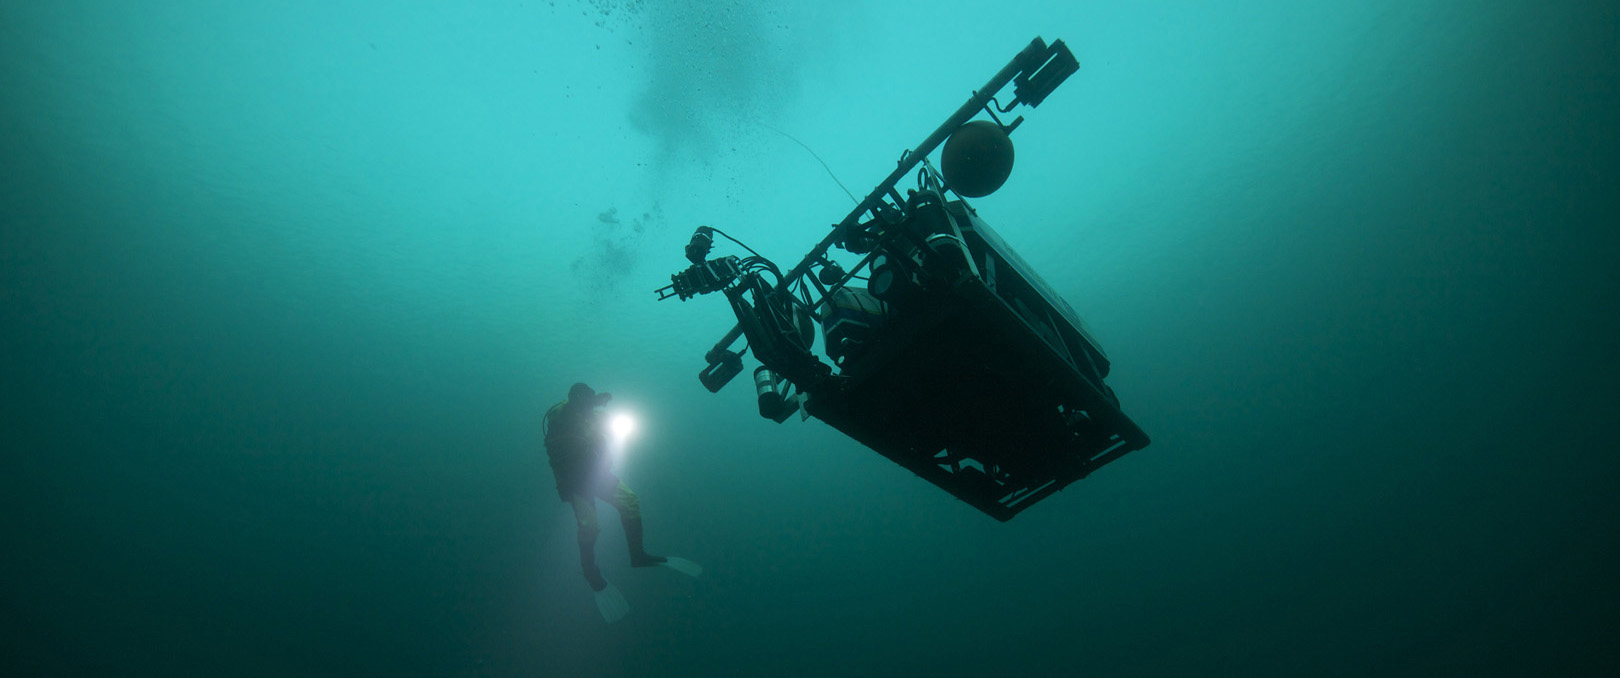 underwater photo of vehicle and a diver